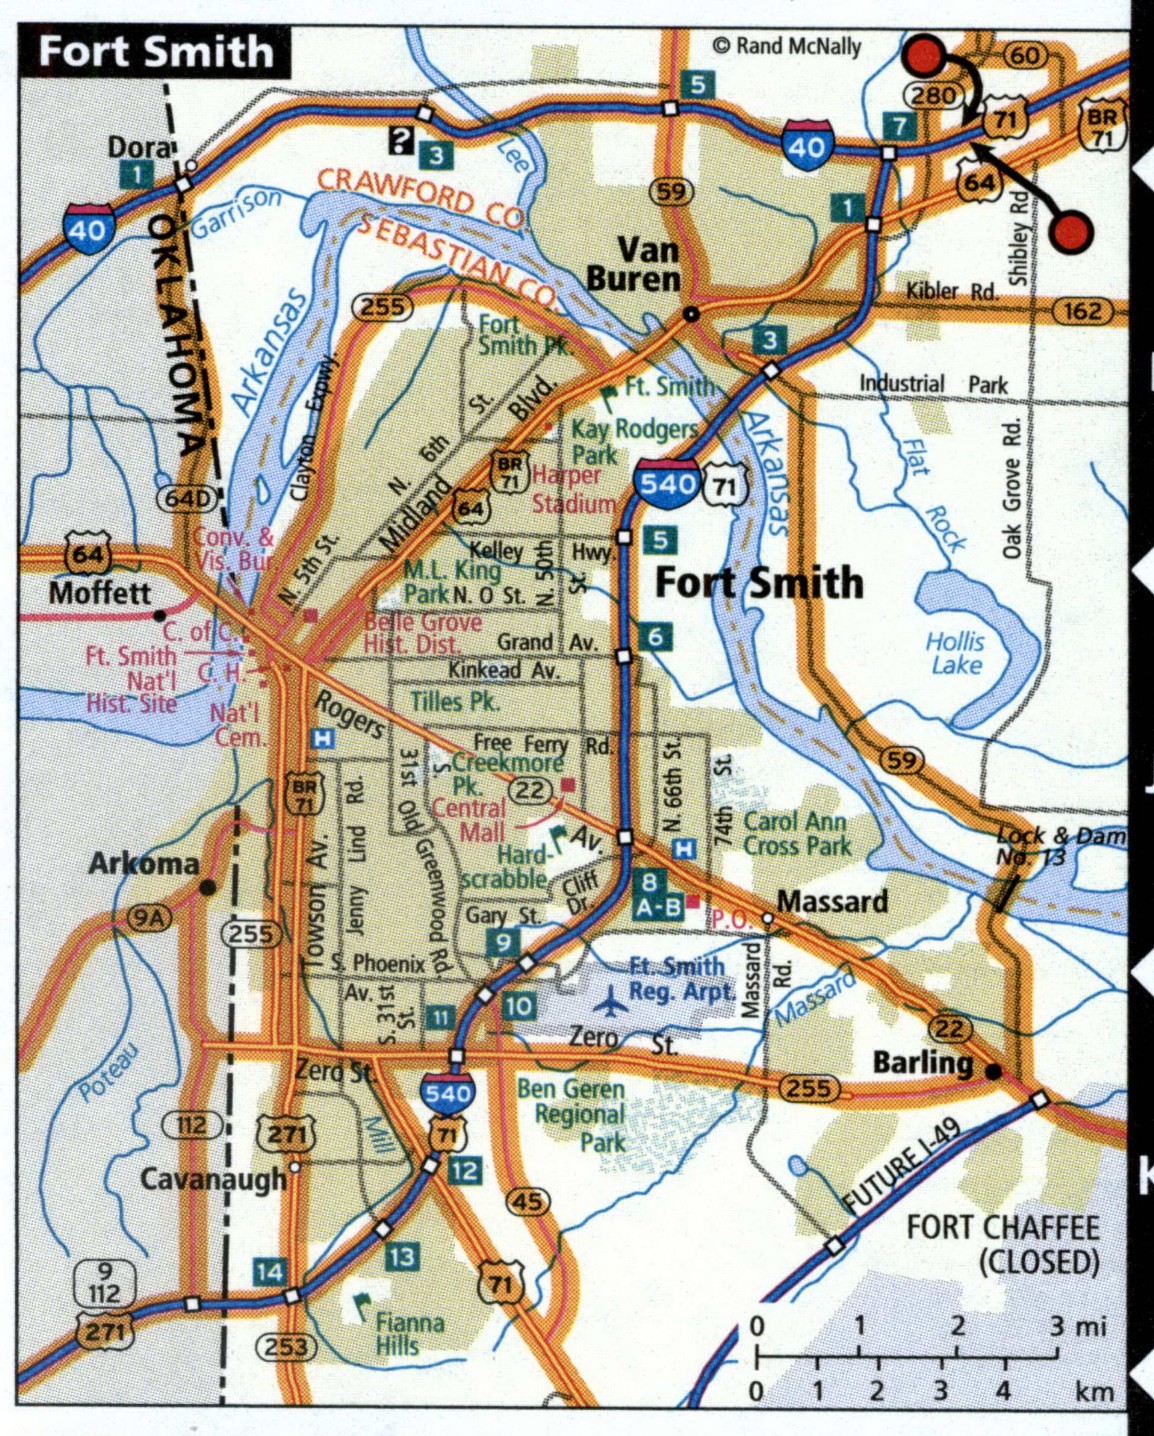 Fort Smith map for truckers